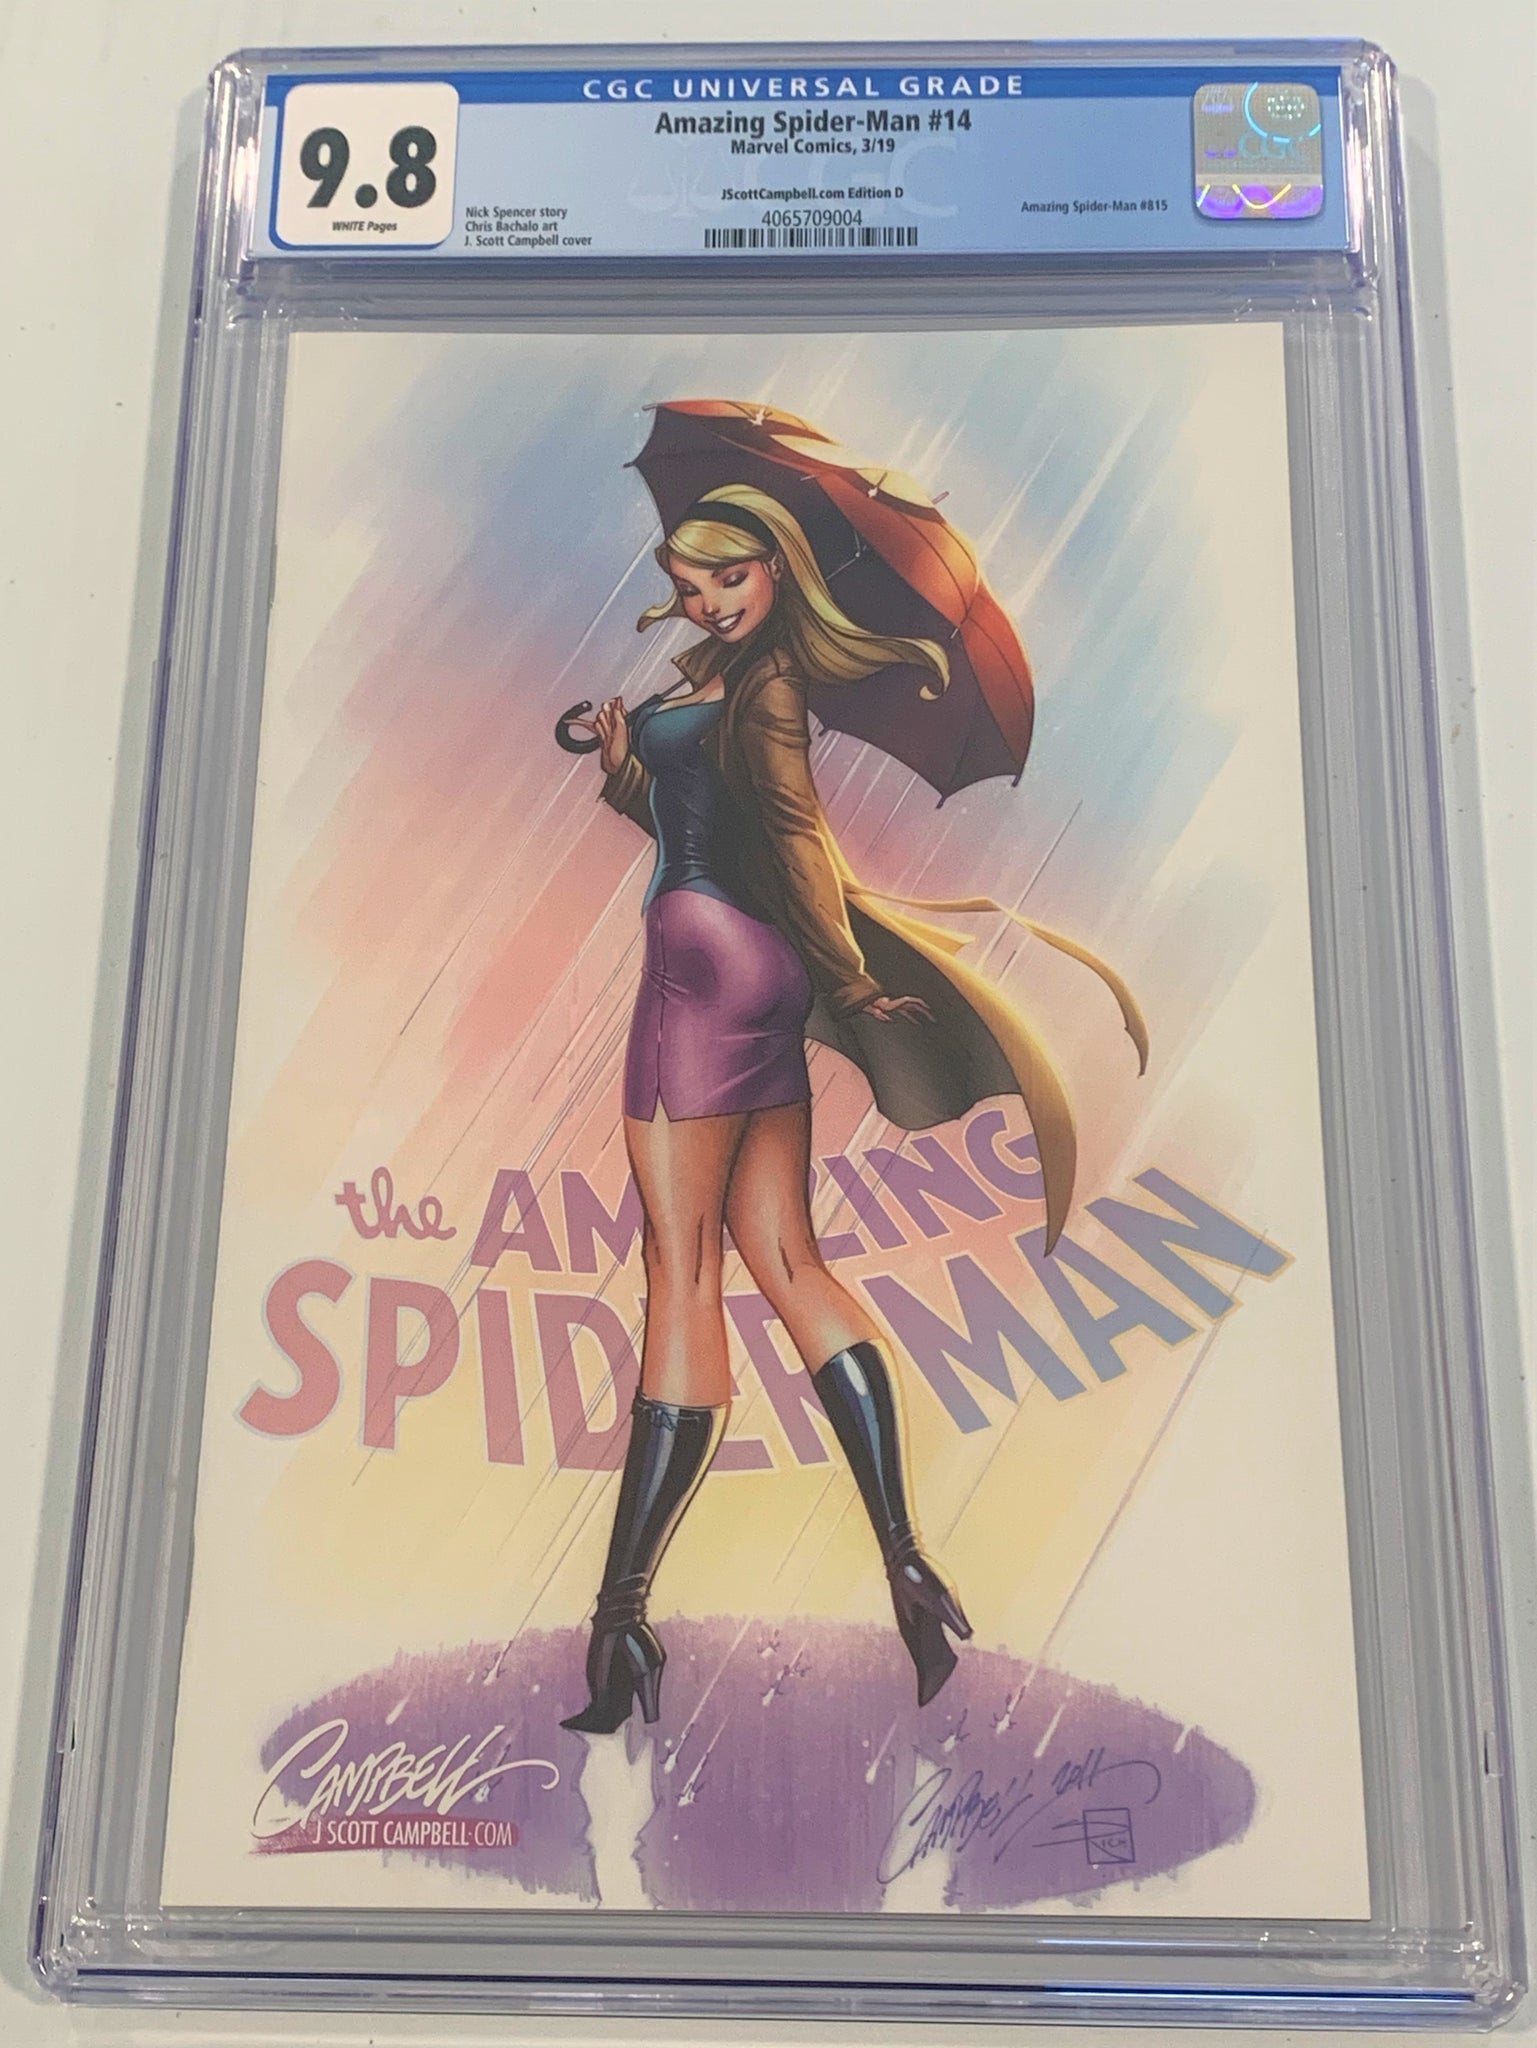 AMAZING SPIDER-MAN #14 CGC 9.8 J SCOTT CAMPBELL GWEN STACY EXCL VARIANT-D